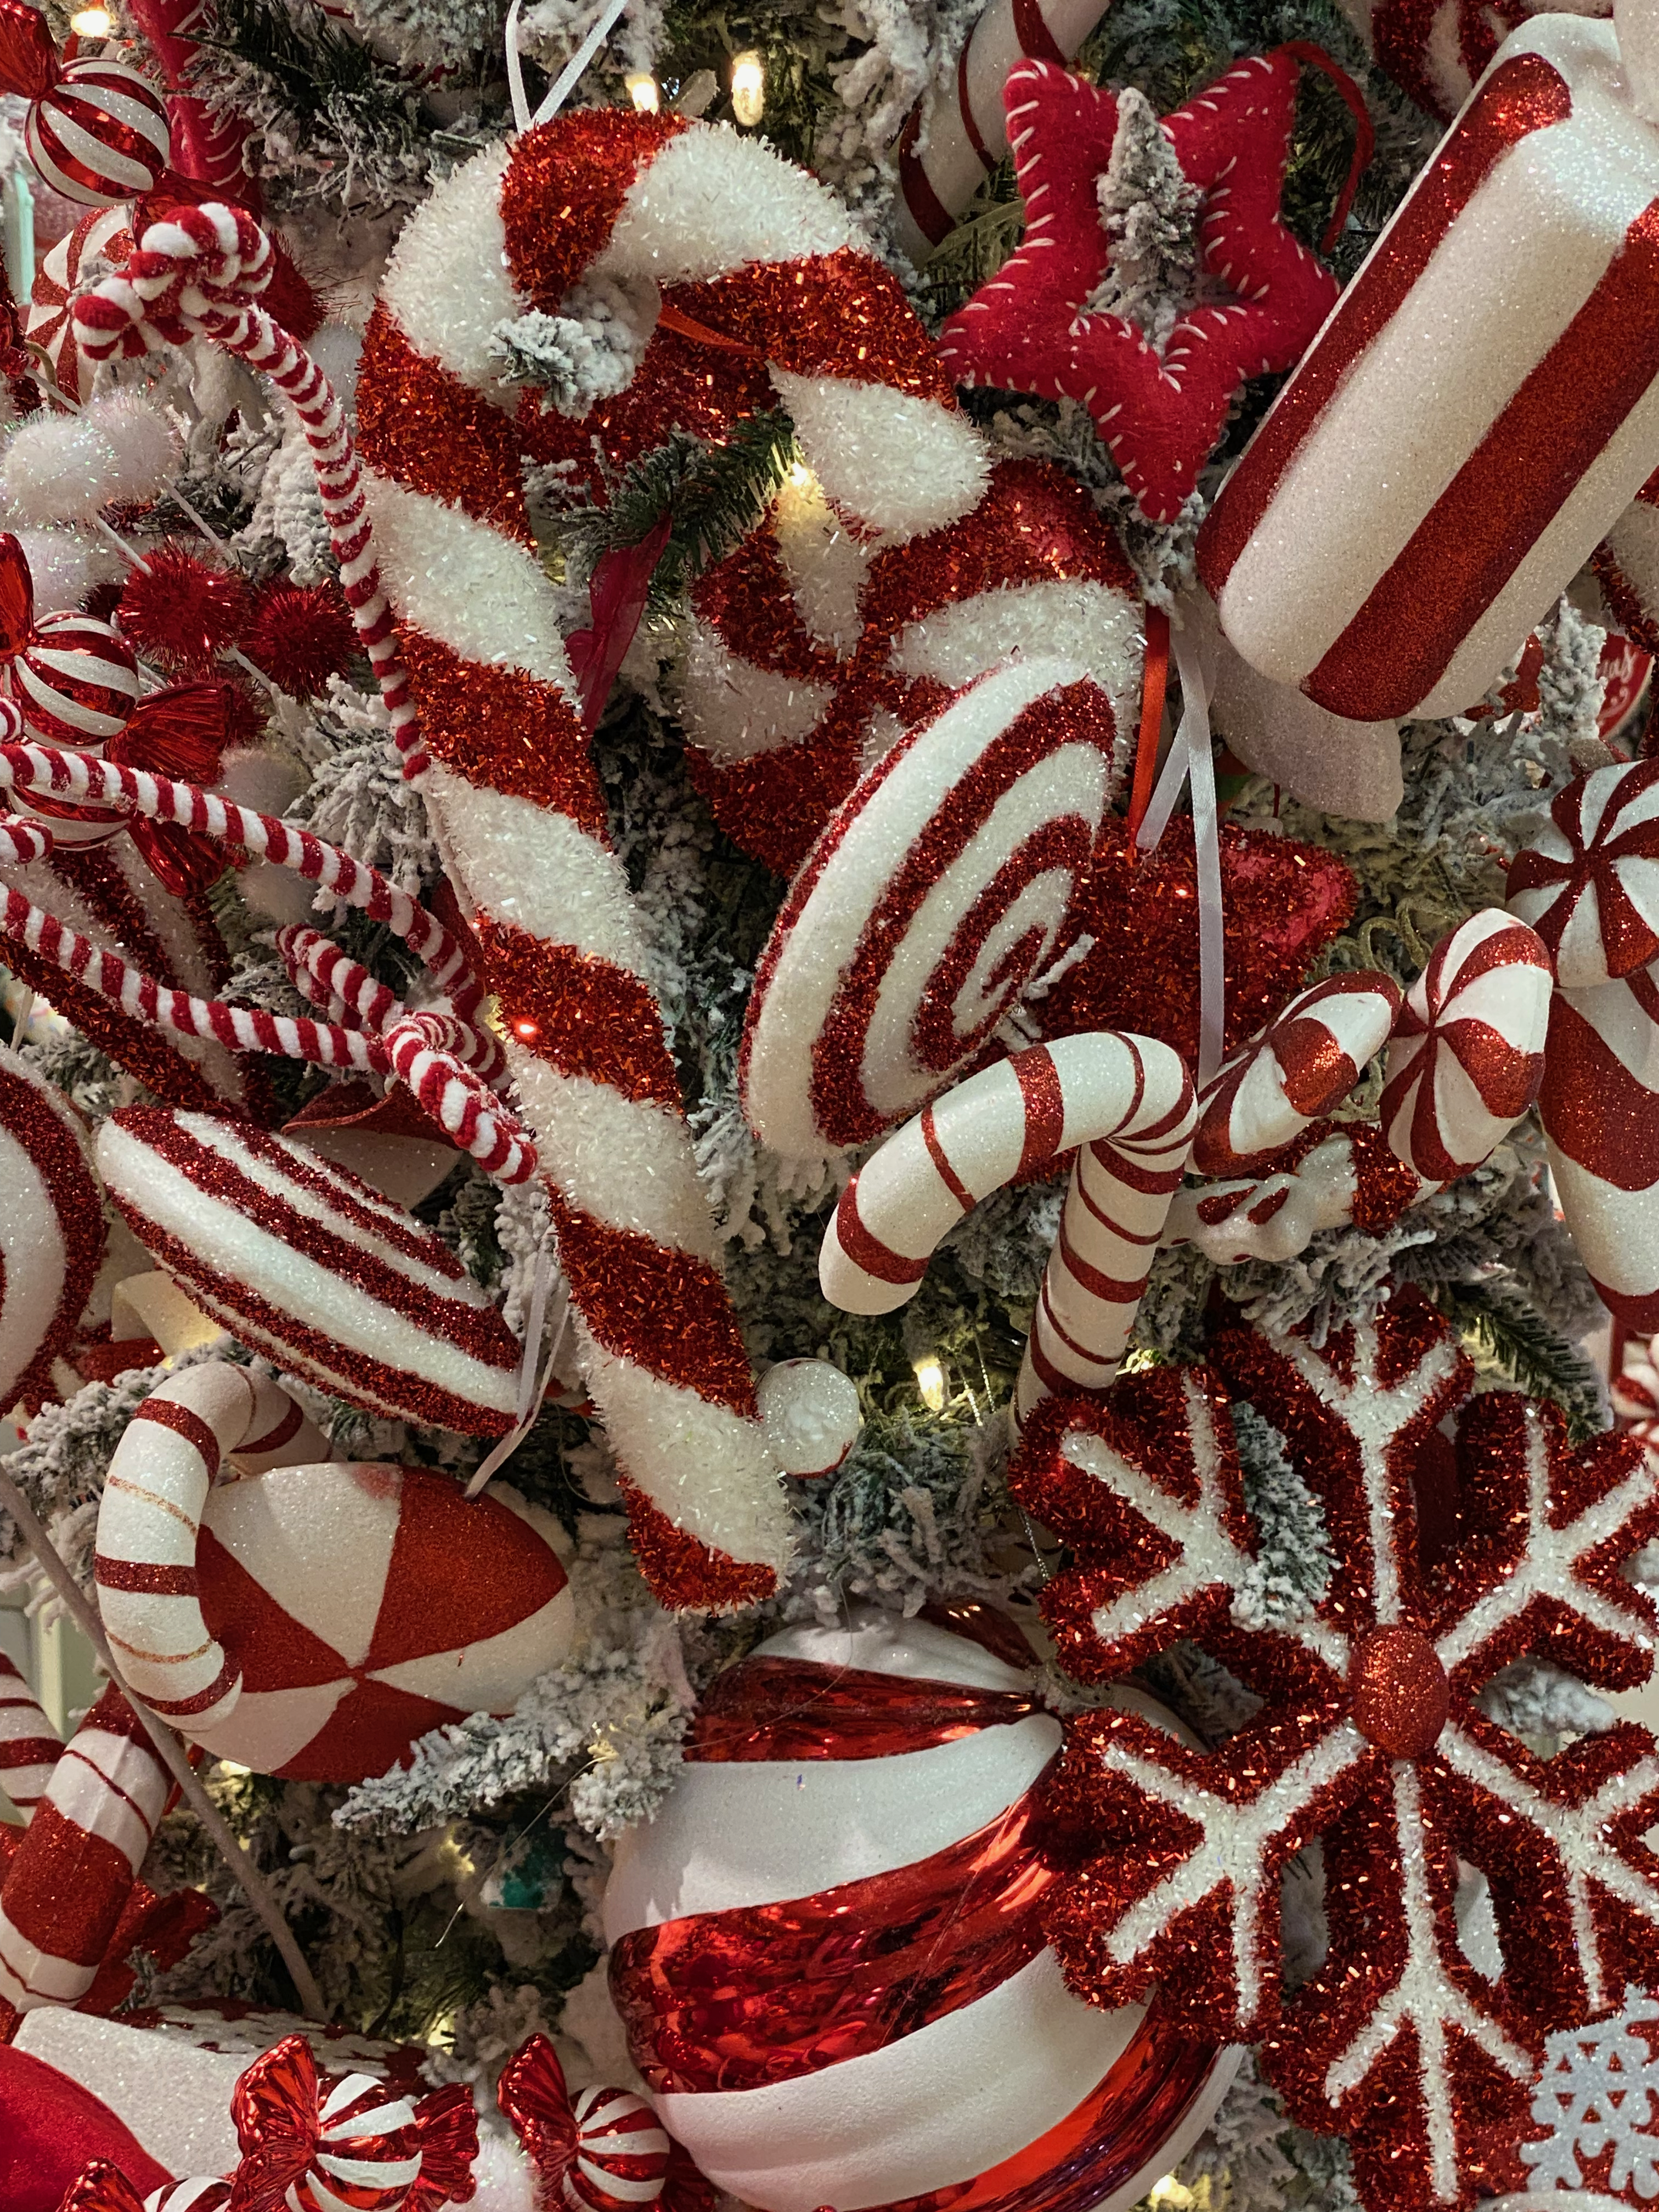 Red Candy Cane Lane Christmas Tree Decorations